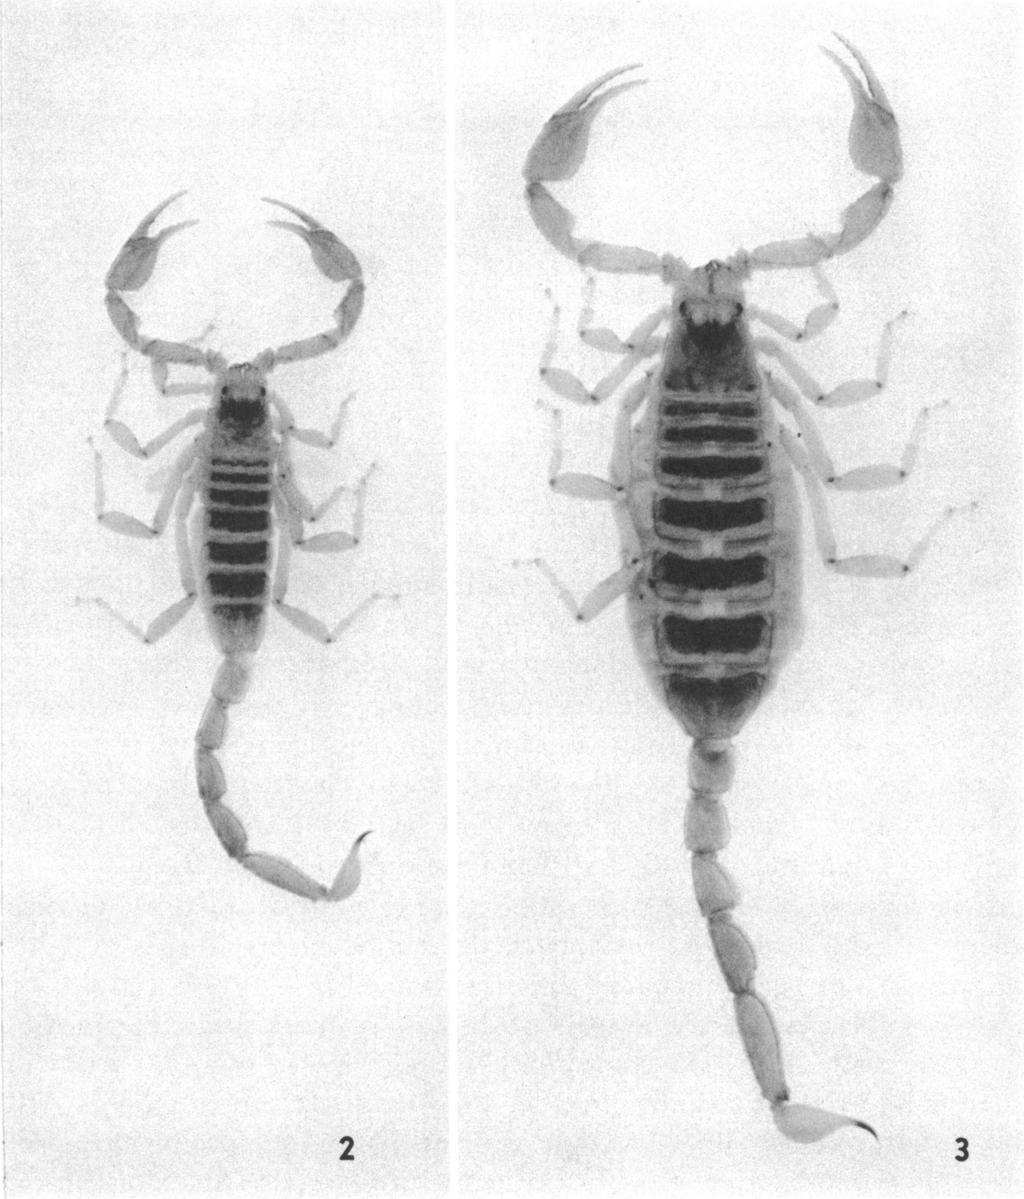 8 AMERICAN MUSEUM NOVITATES NO. 2278 W., *1. IN 2 3 FIGs. 2, 3. Vejovis boreus (Girard). 2. Male. 3. Female. Both X 2. variable, more distinct in younger specimens, in some scarcely visible.